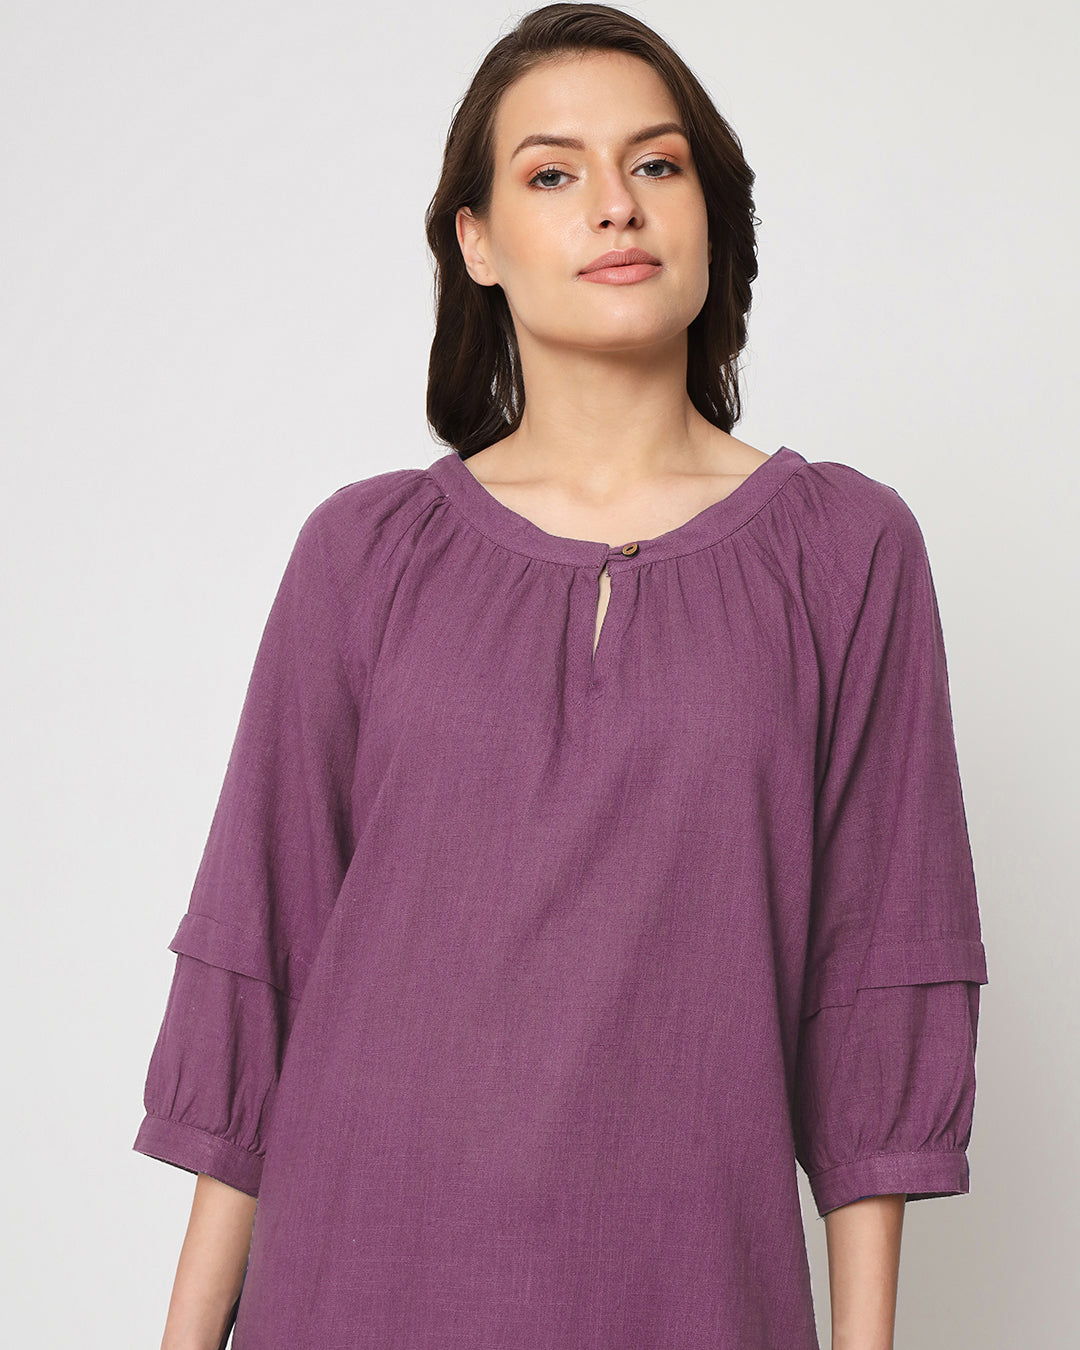 Wisteria Purple Button Neck Solid Top (Without Bottoms)